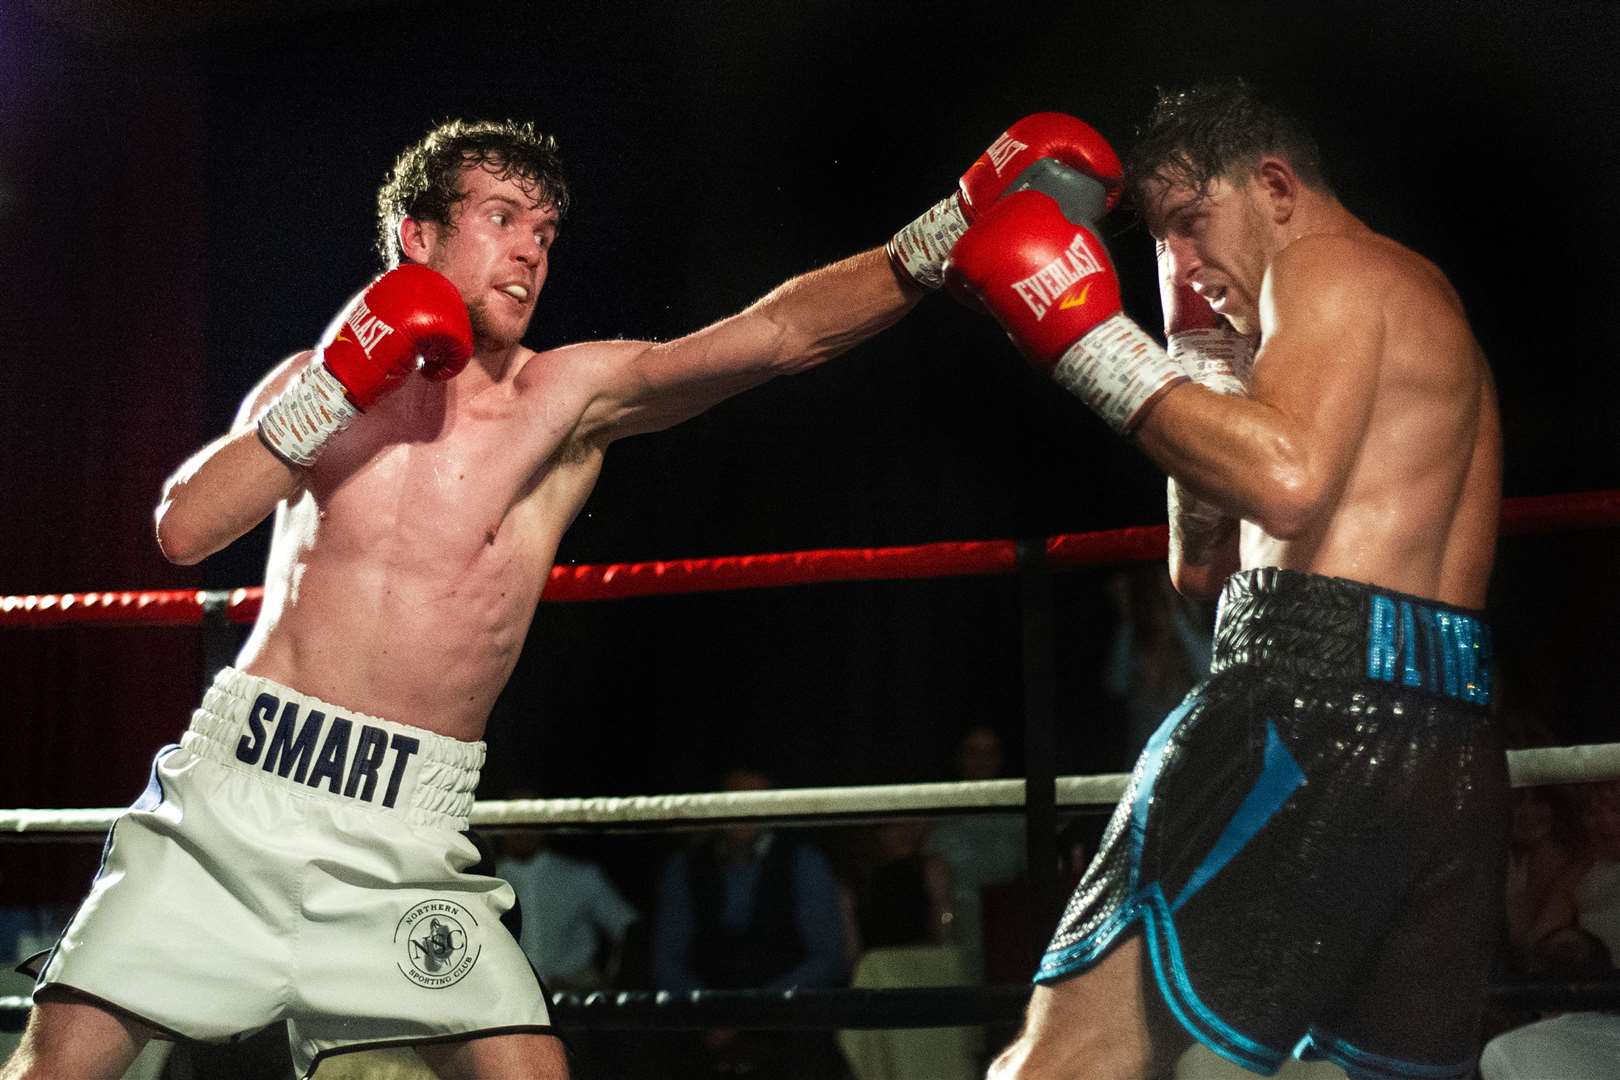 Elgin boxer Andrew Smart defeated Englishman Dean Jones at the Elgin Town Hall with a 58-56 points victory over six rounds in September 2019. Picture: Daniel Forsyth